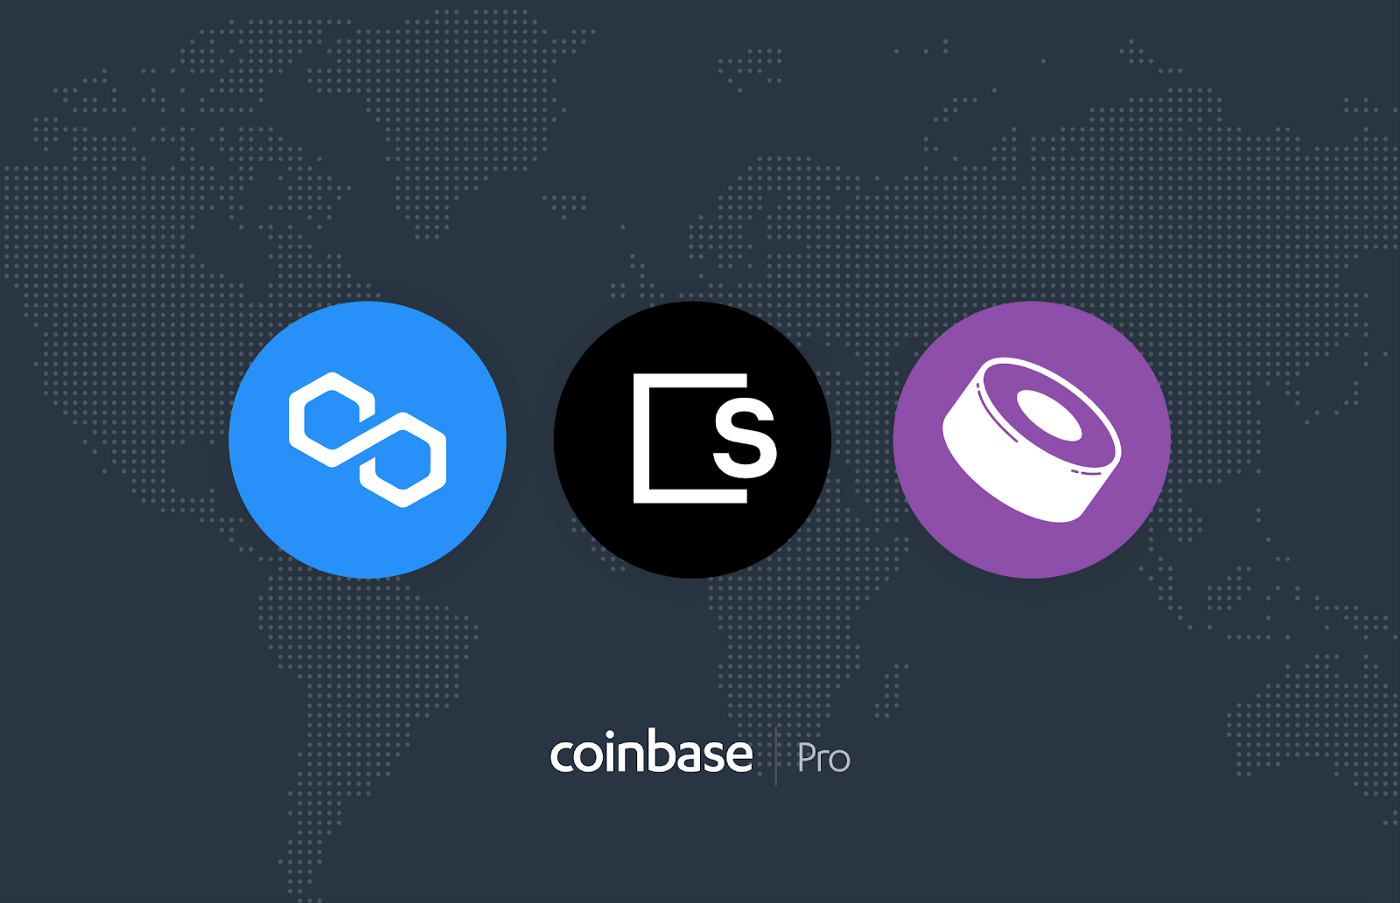 Polygon (MATIC), SKALE (SKL) and SushiSwap (SUSHI) are launching on Coinbase Pro